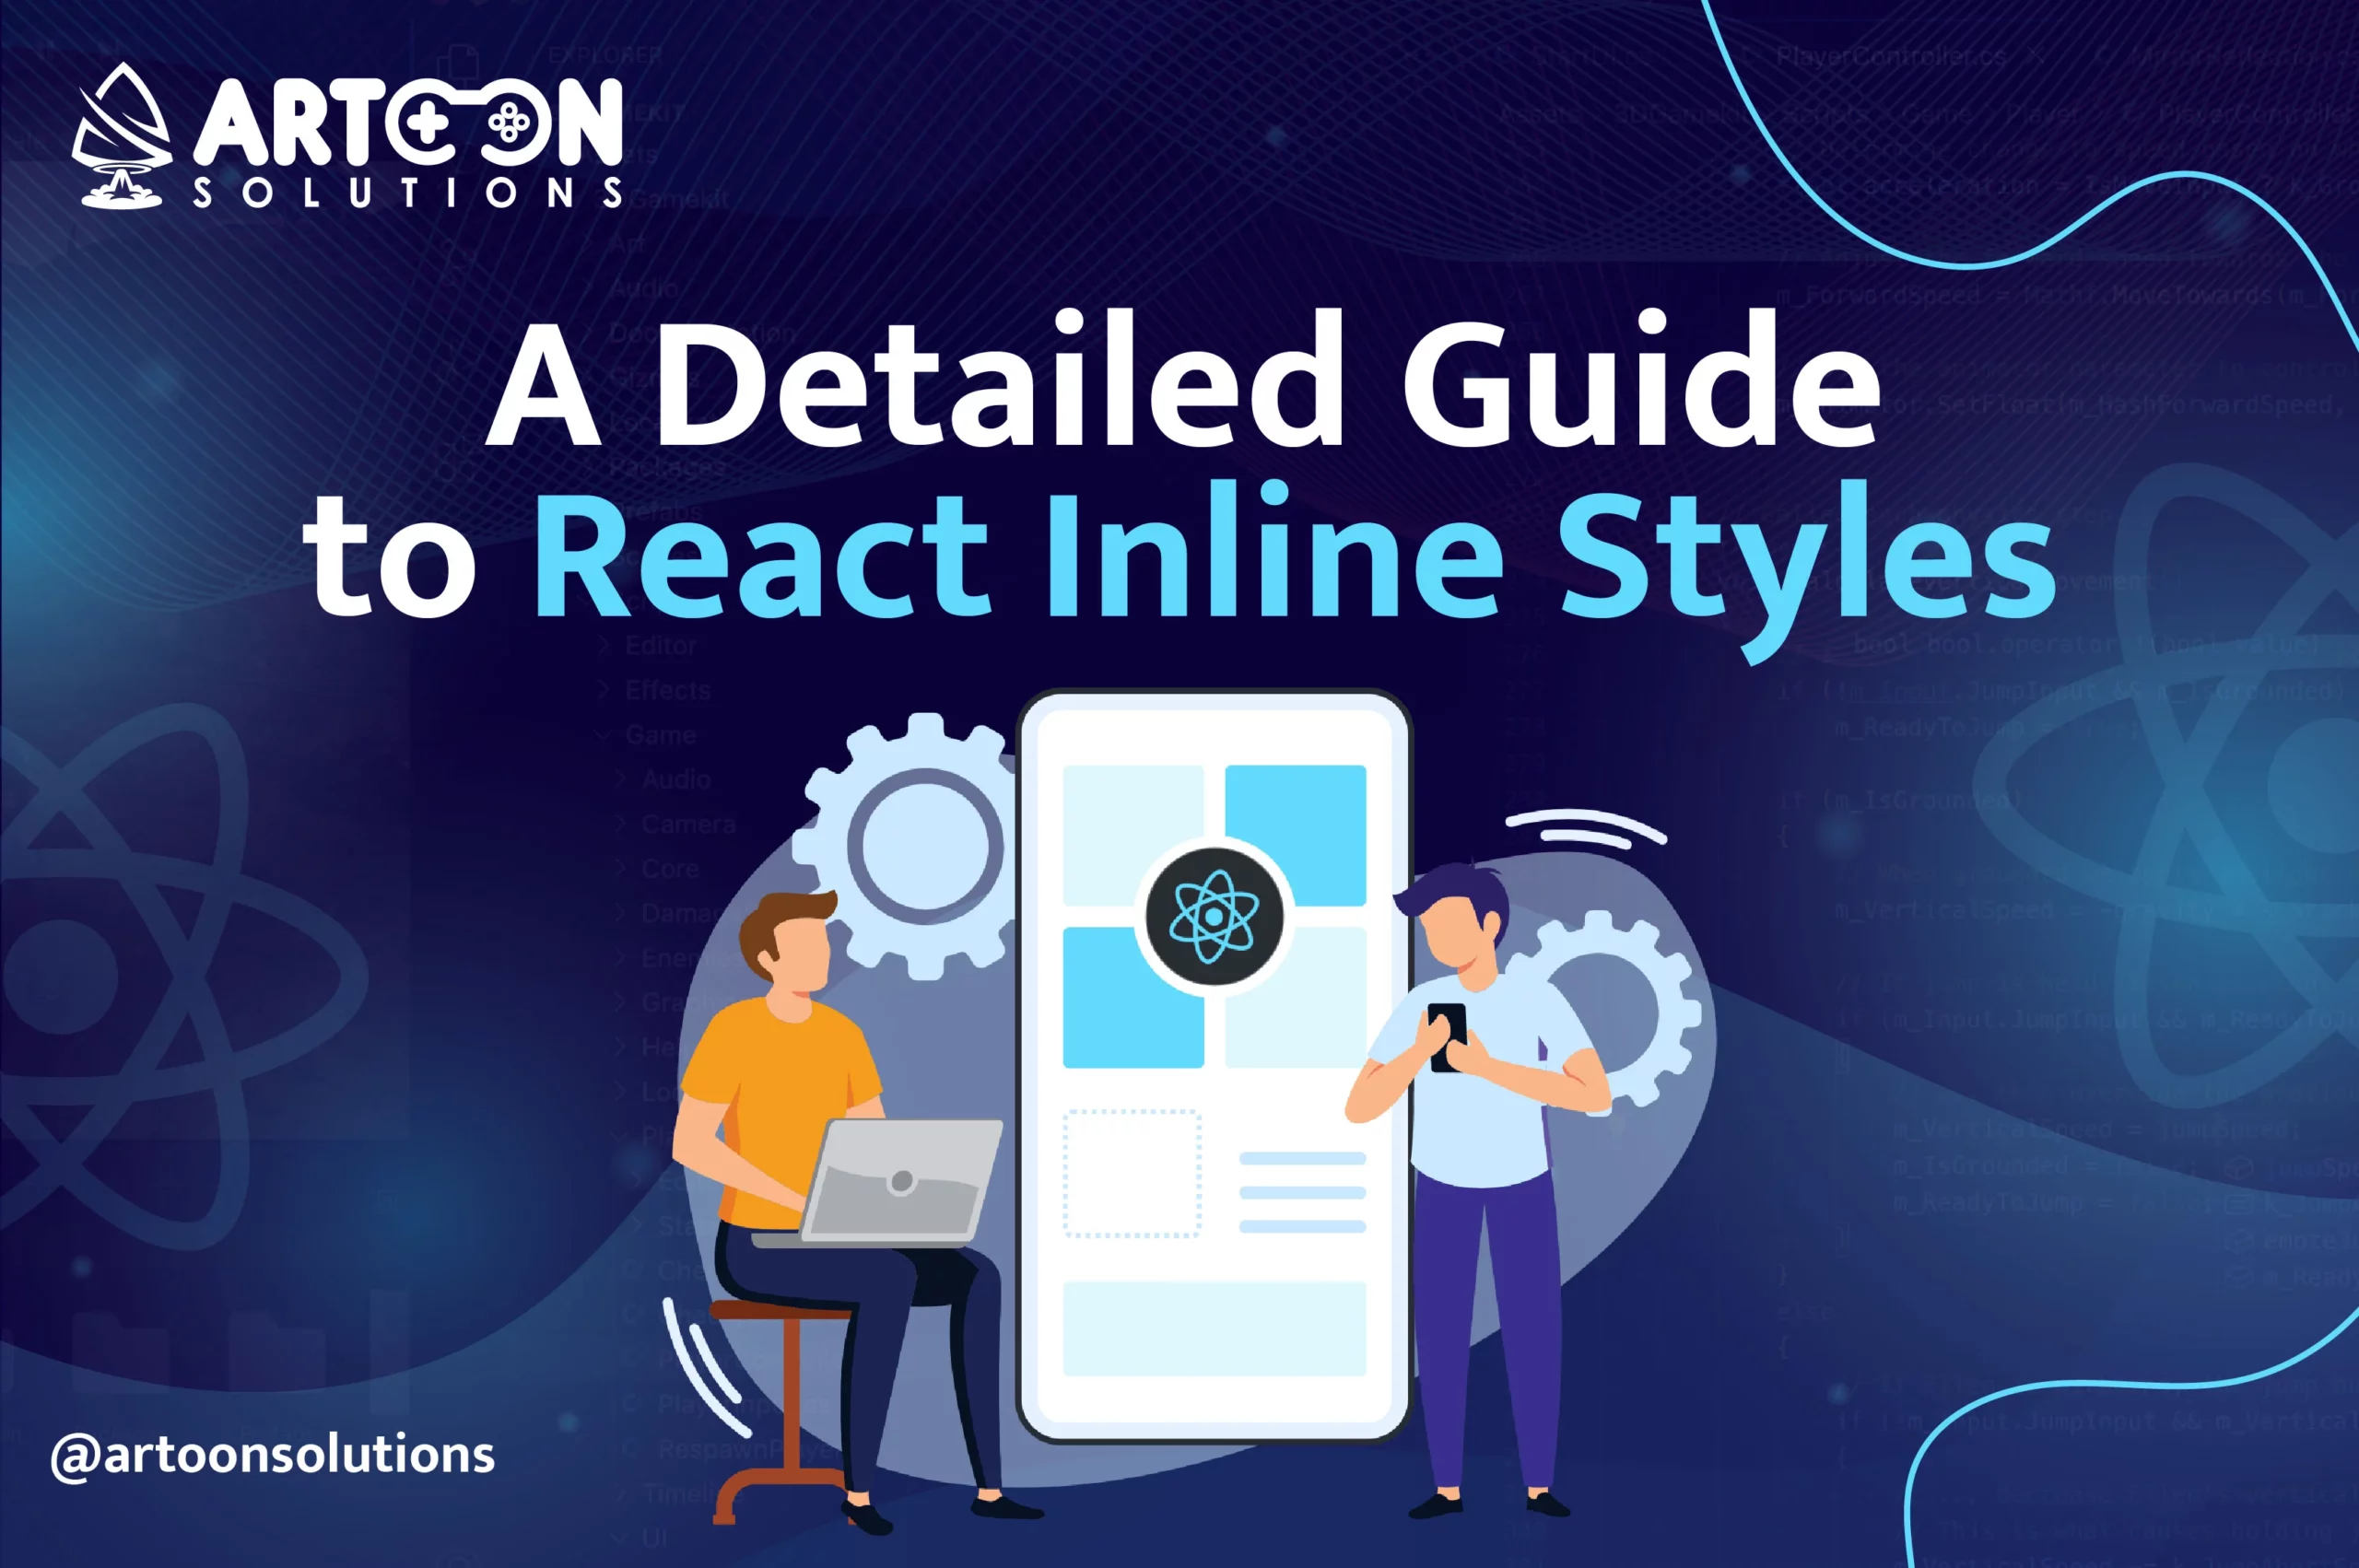 A Detailed Guide to React Inline Styles